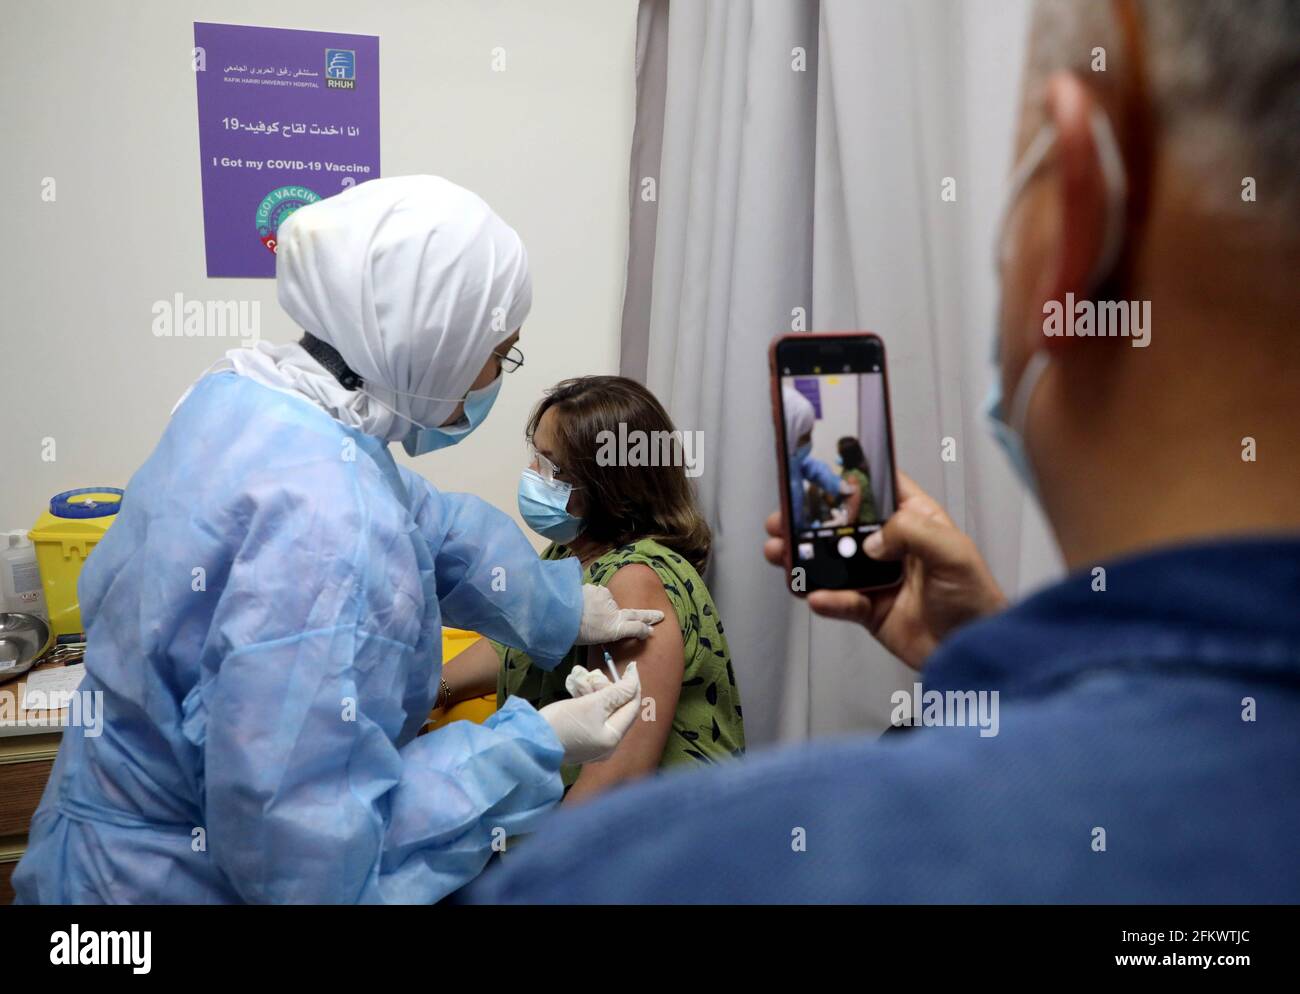 Beirut, Lebanon. 4th May, 2021. A woman receives COVID-19 vaccine in a hospital in Beirut, Lebanon, on May 4, 2021. Lebanon registered on Monday 249 new COVID-19 cases, raising the total number of infections to 528,457, the Health Ministry reported. Lebanese Caretaker Health Minister Hamad Hassan said he expects 60 percent of the Lebanese to be vaccinated by September 2021. Credit: Bilal Jawich/Xinhua/Alamy Live News Stock Photo